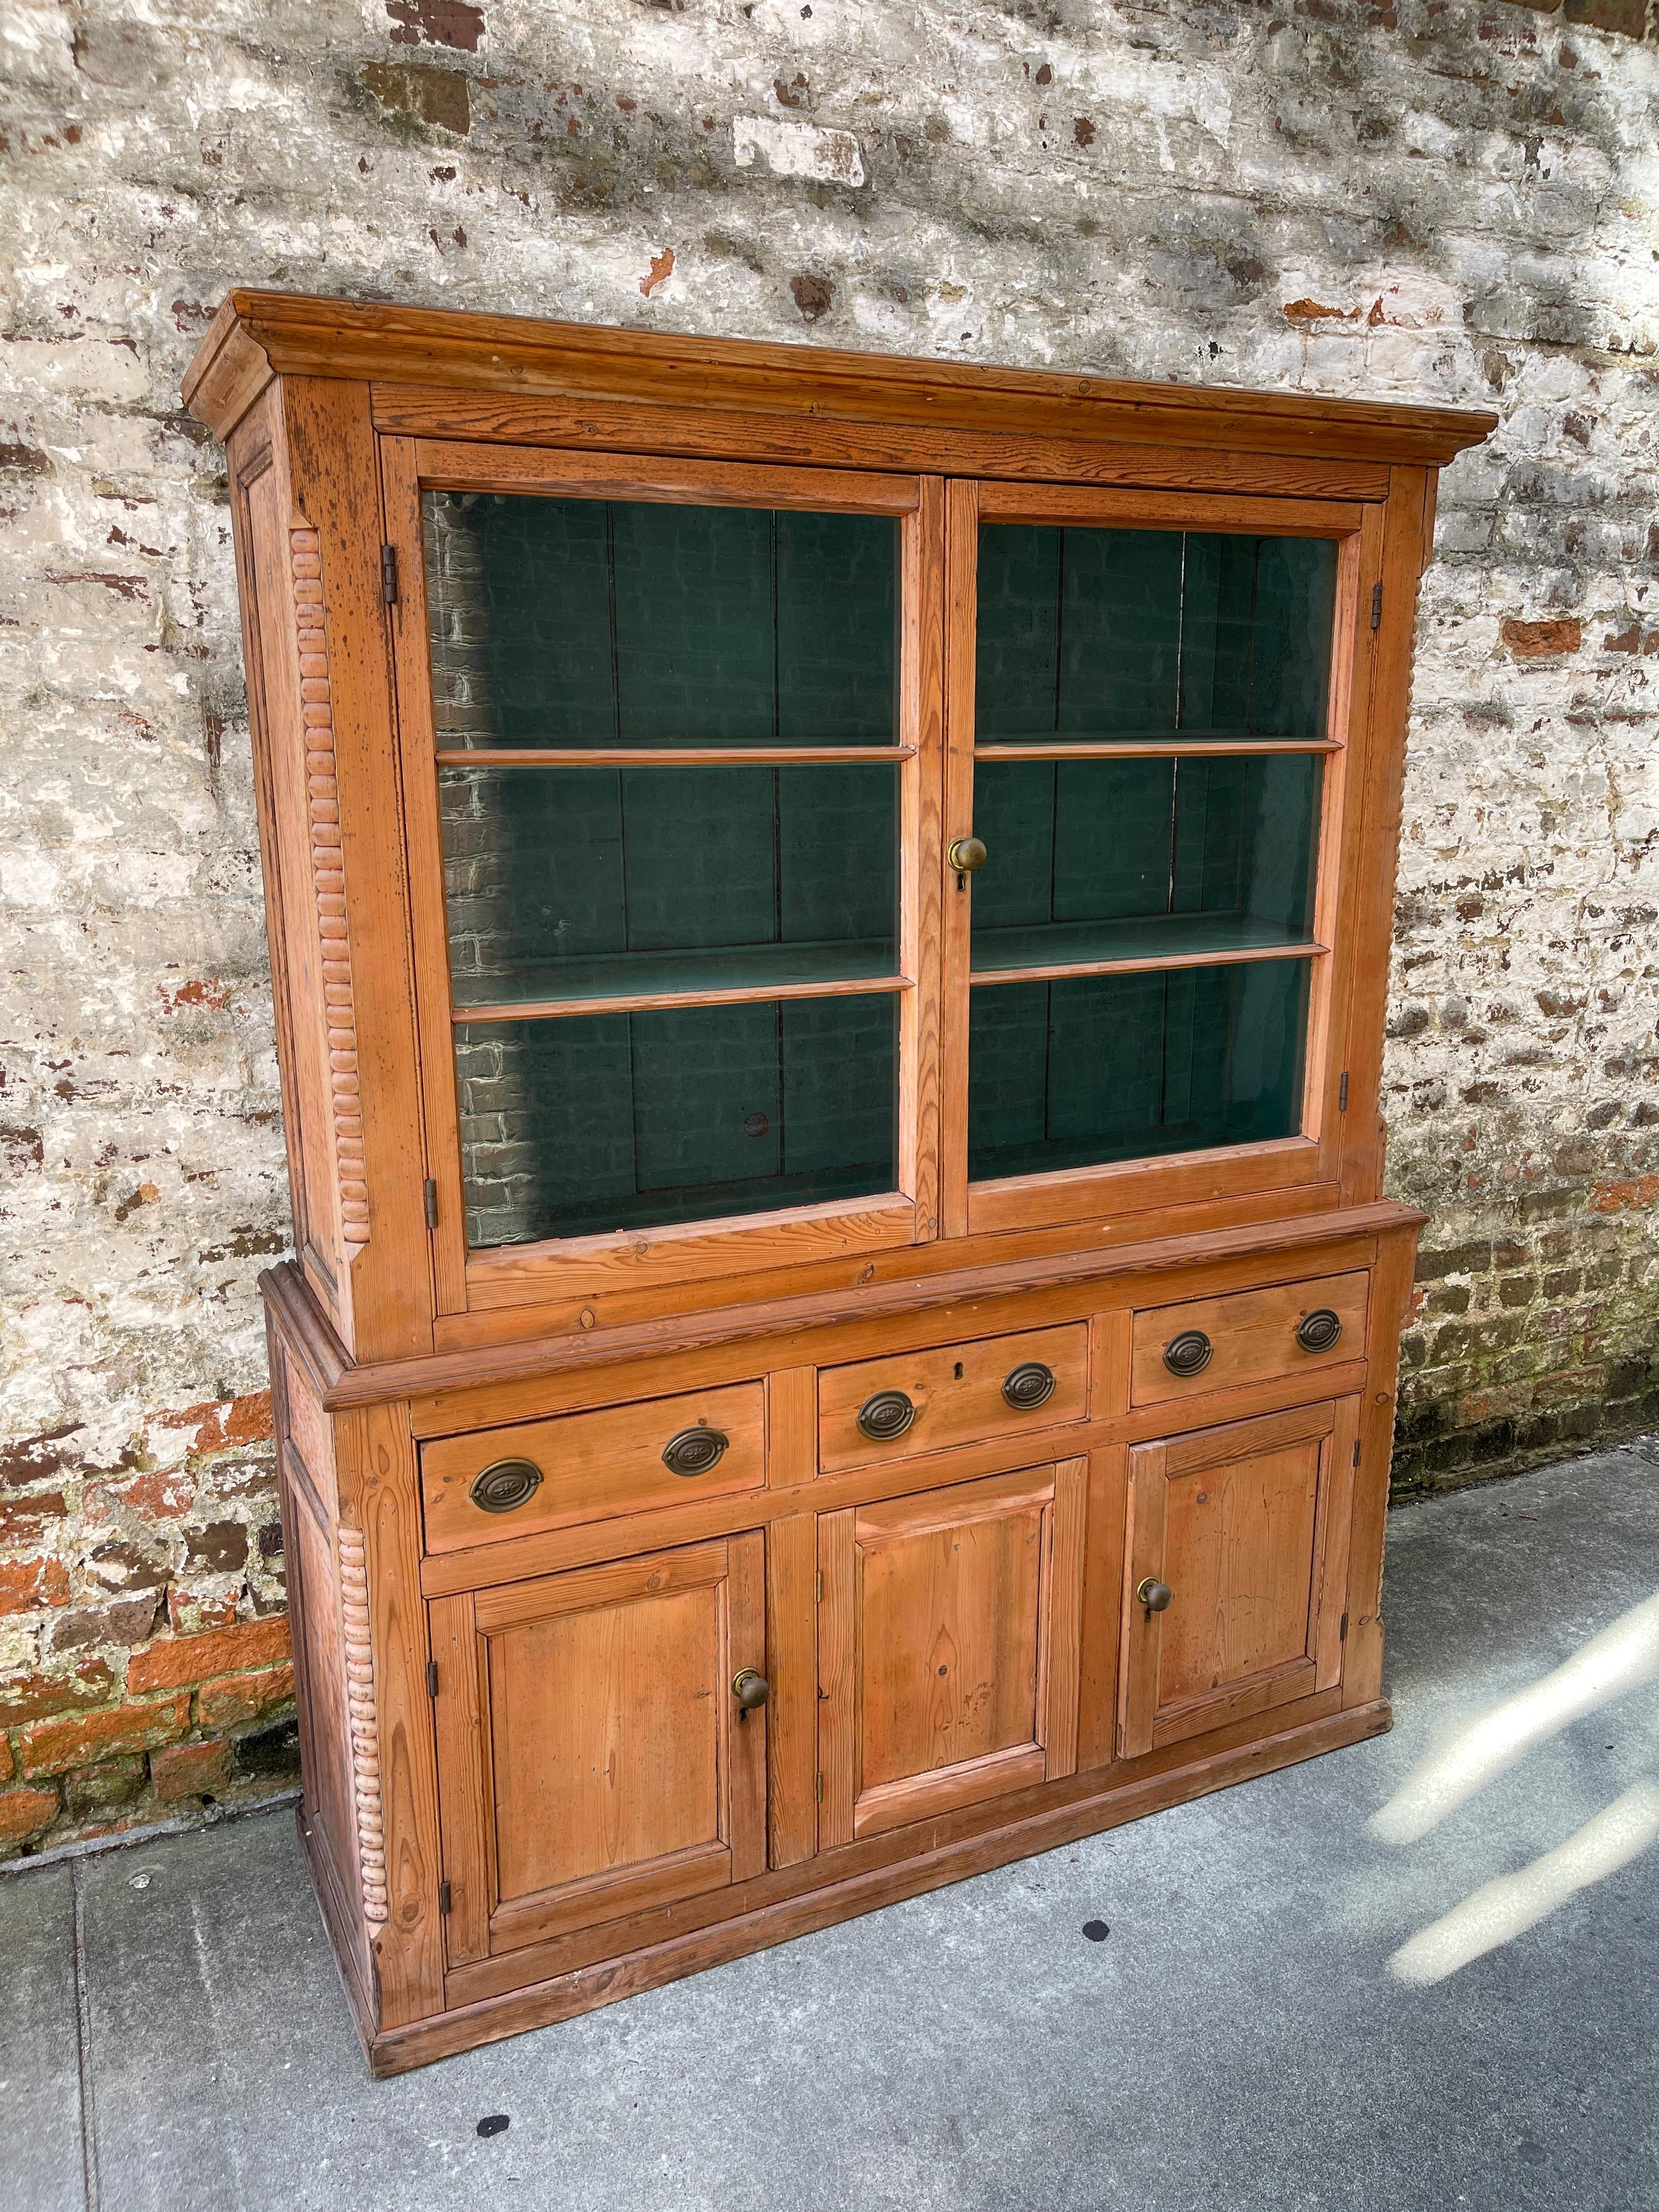 Pine cupboard with upper glass cabinet early 20th century. English 